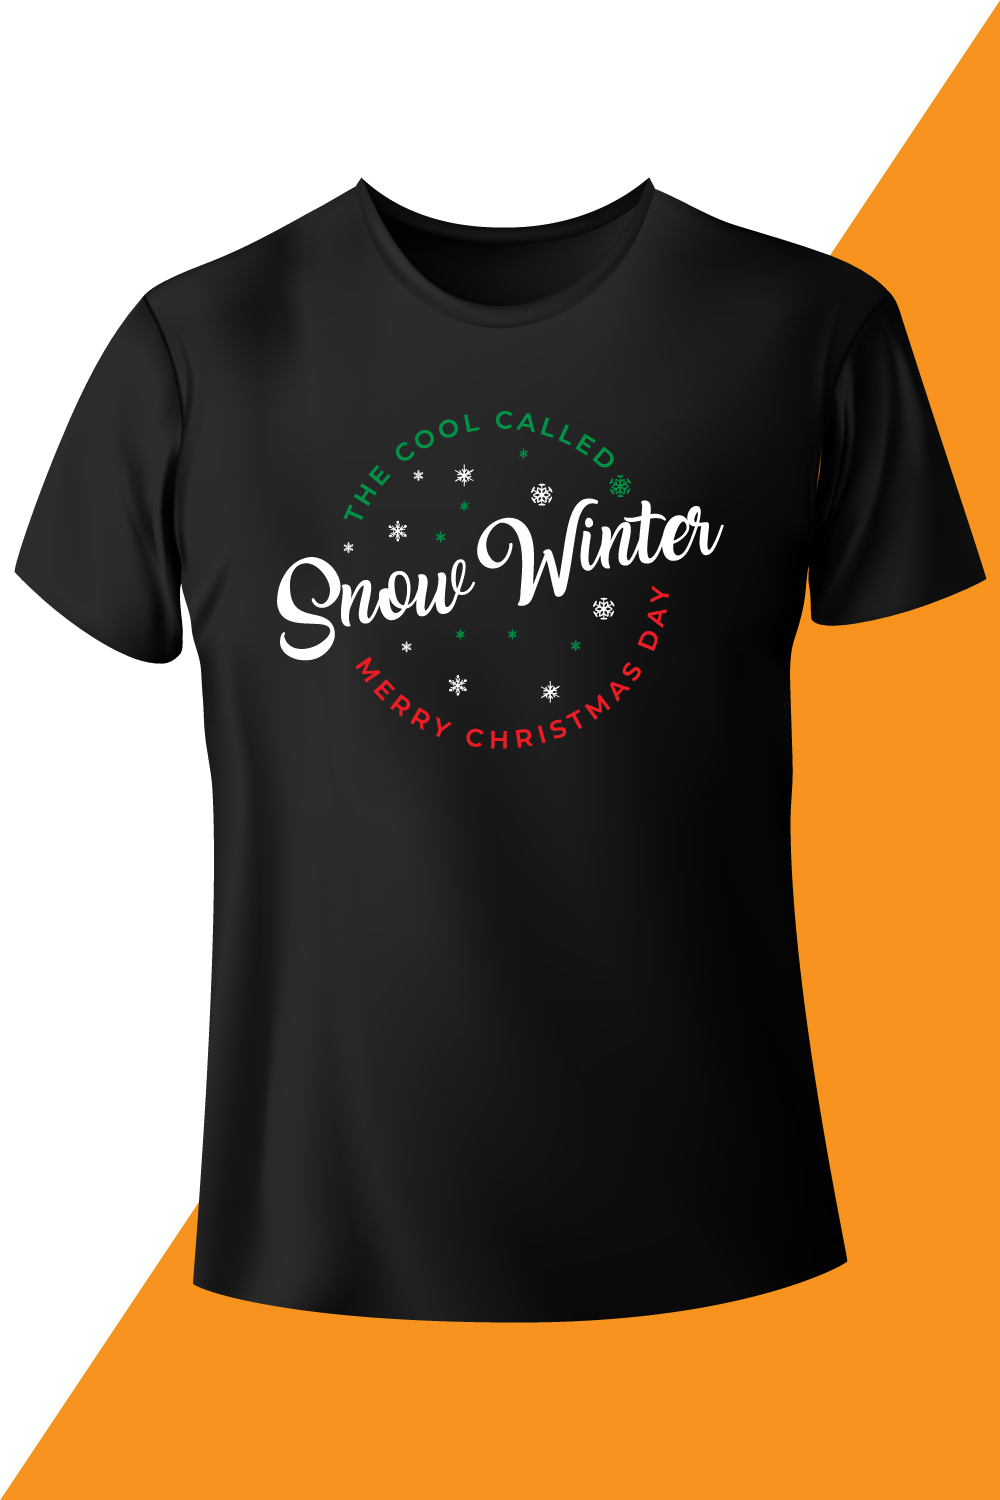 Image of a black t-shirt with a charming print on the theme of Merry Christmas.